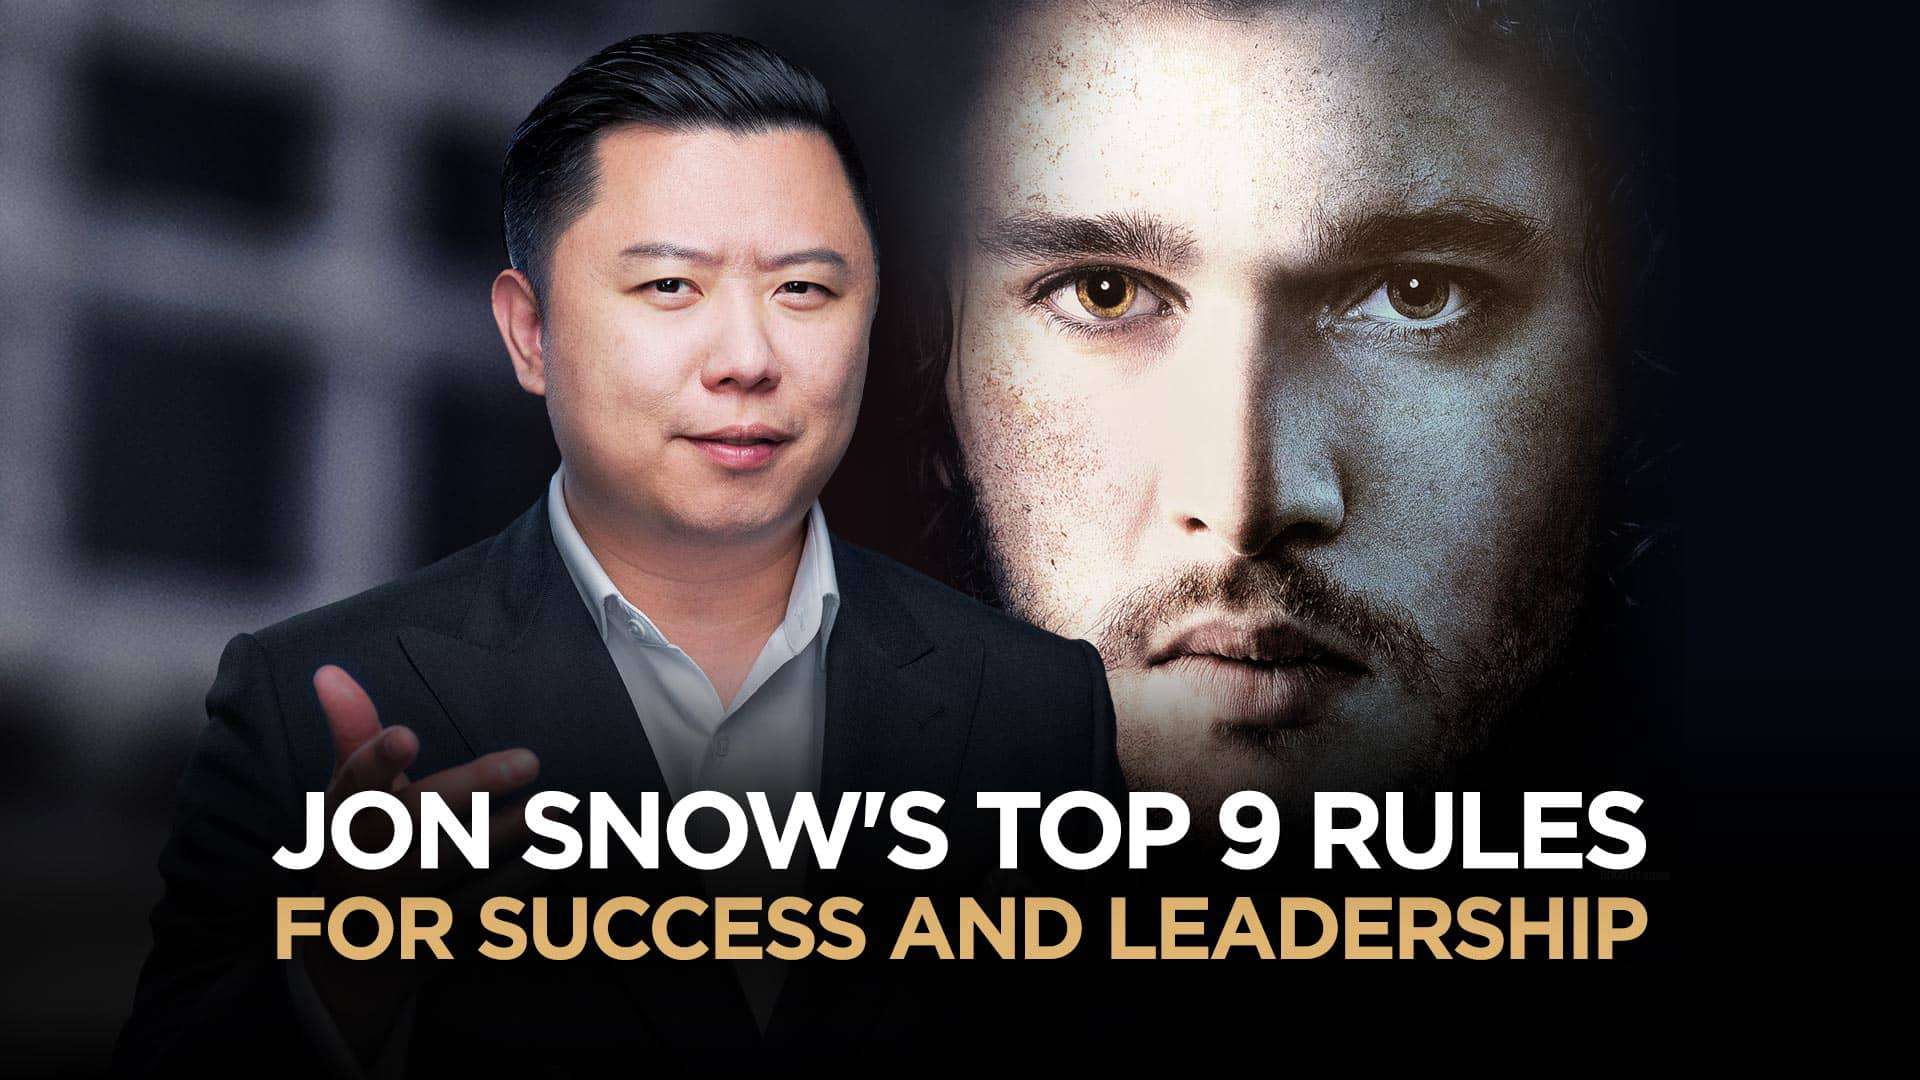 Jon Snow's Top 9 Rules for Success and Leadership